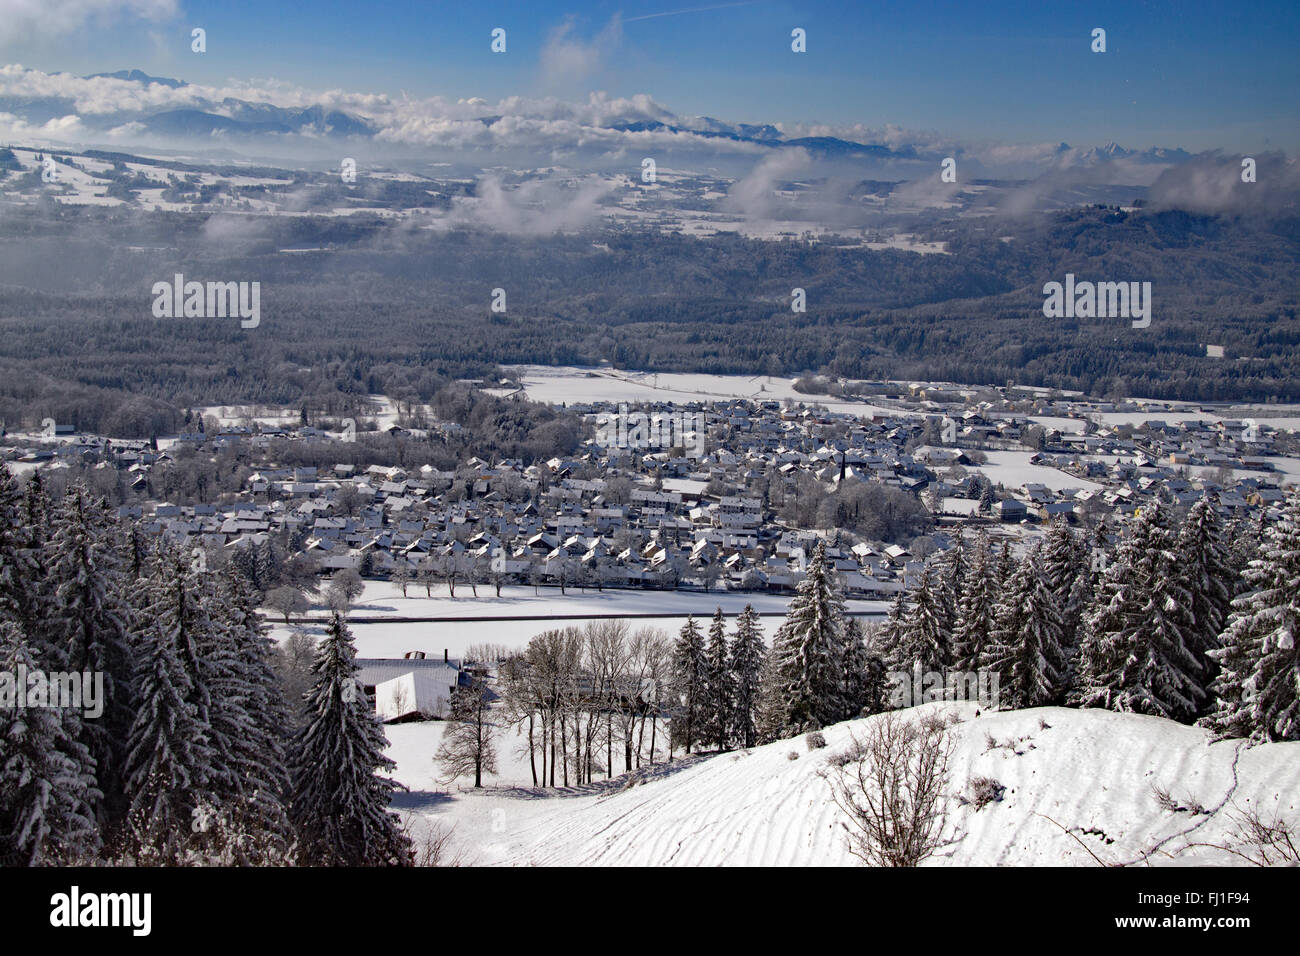 Peissenberg is a municipality in the Weilheim-Schongau district, in Bavaria, Germany. Stock Photo